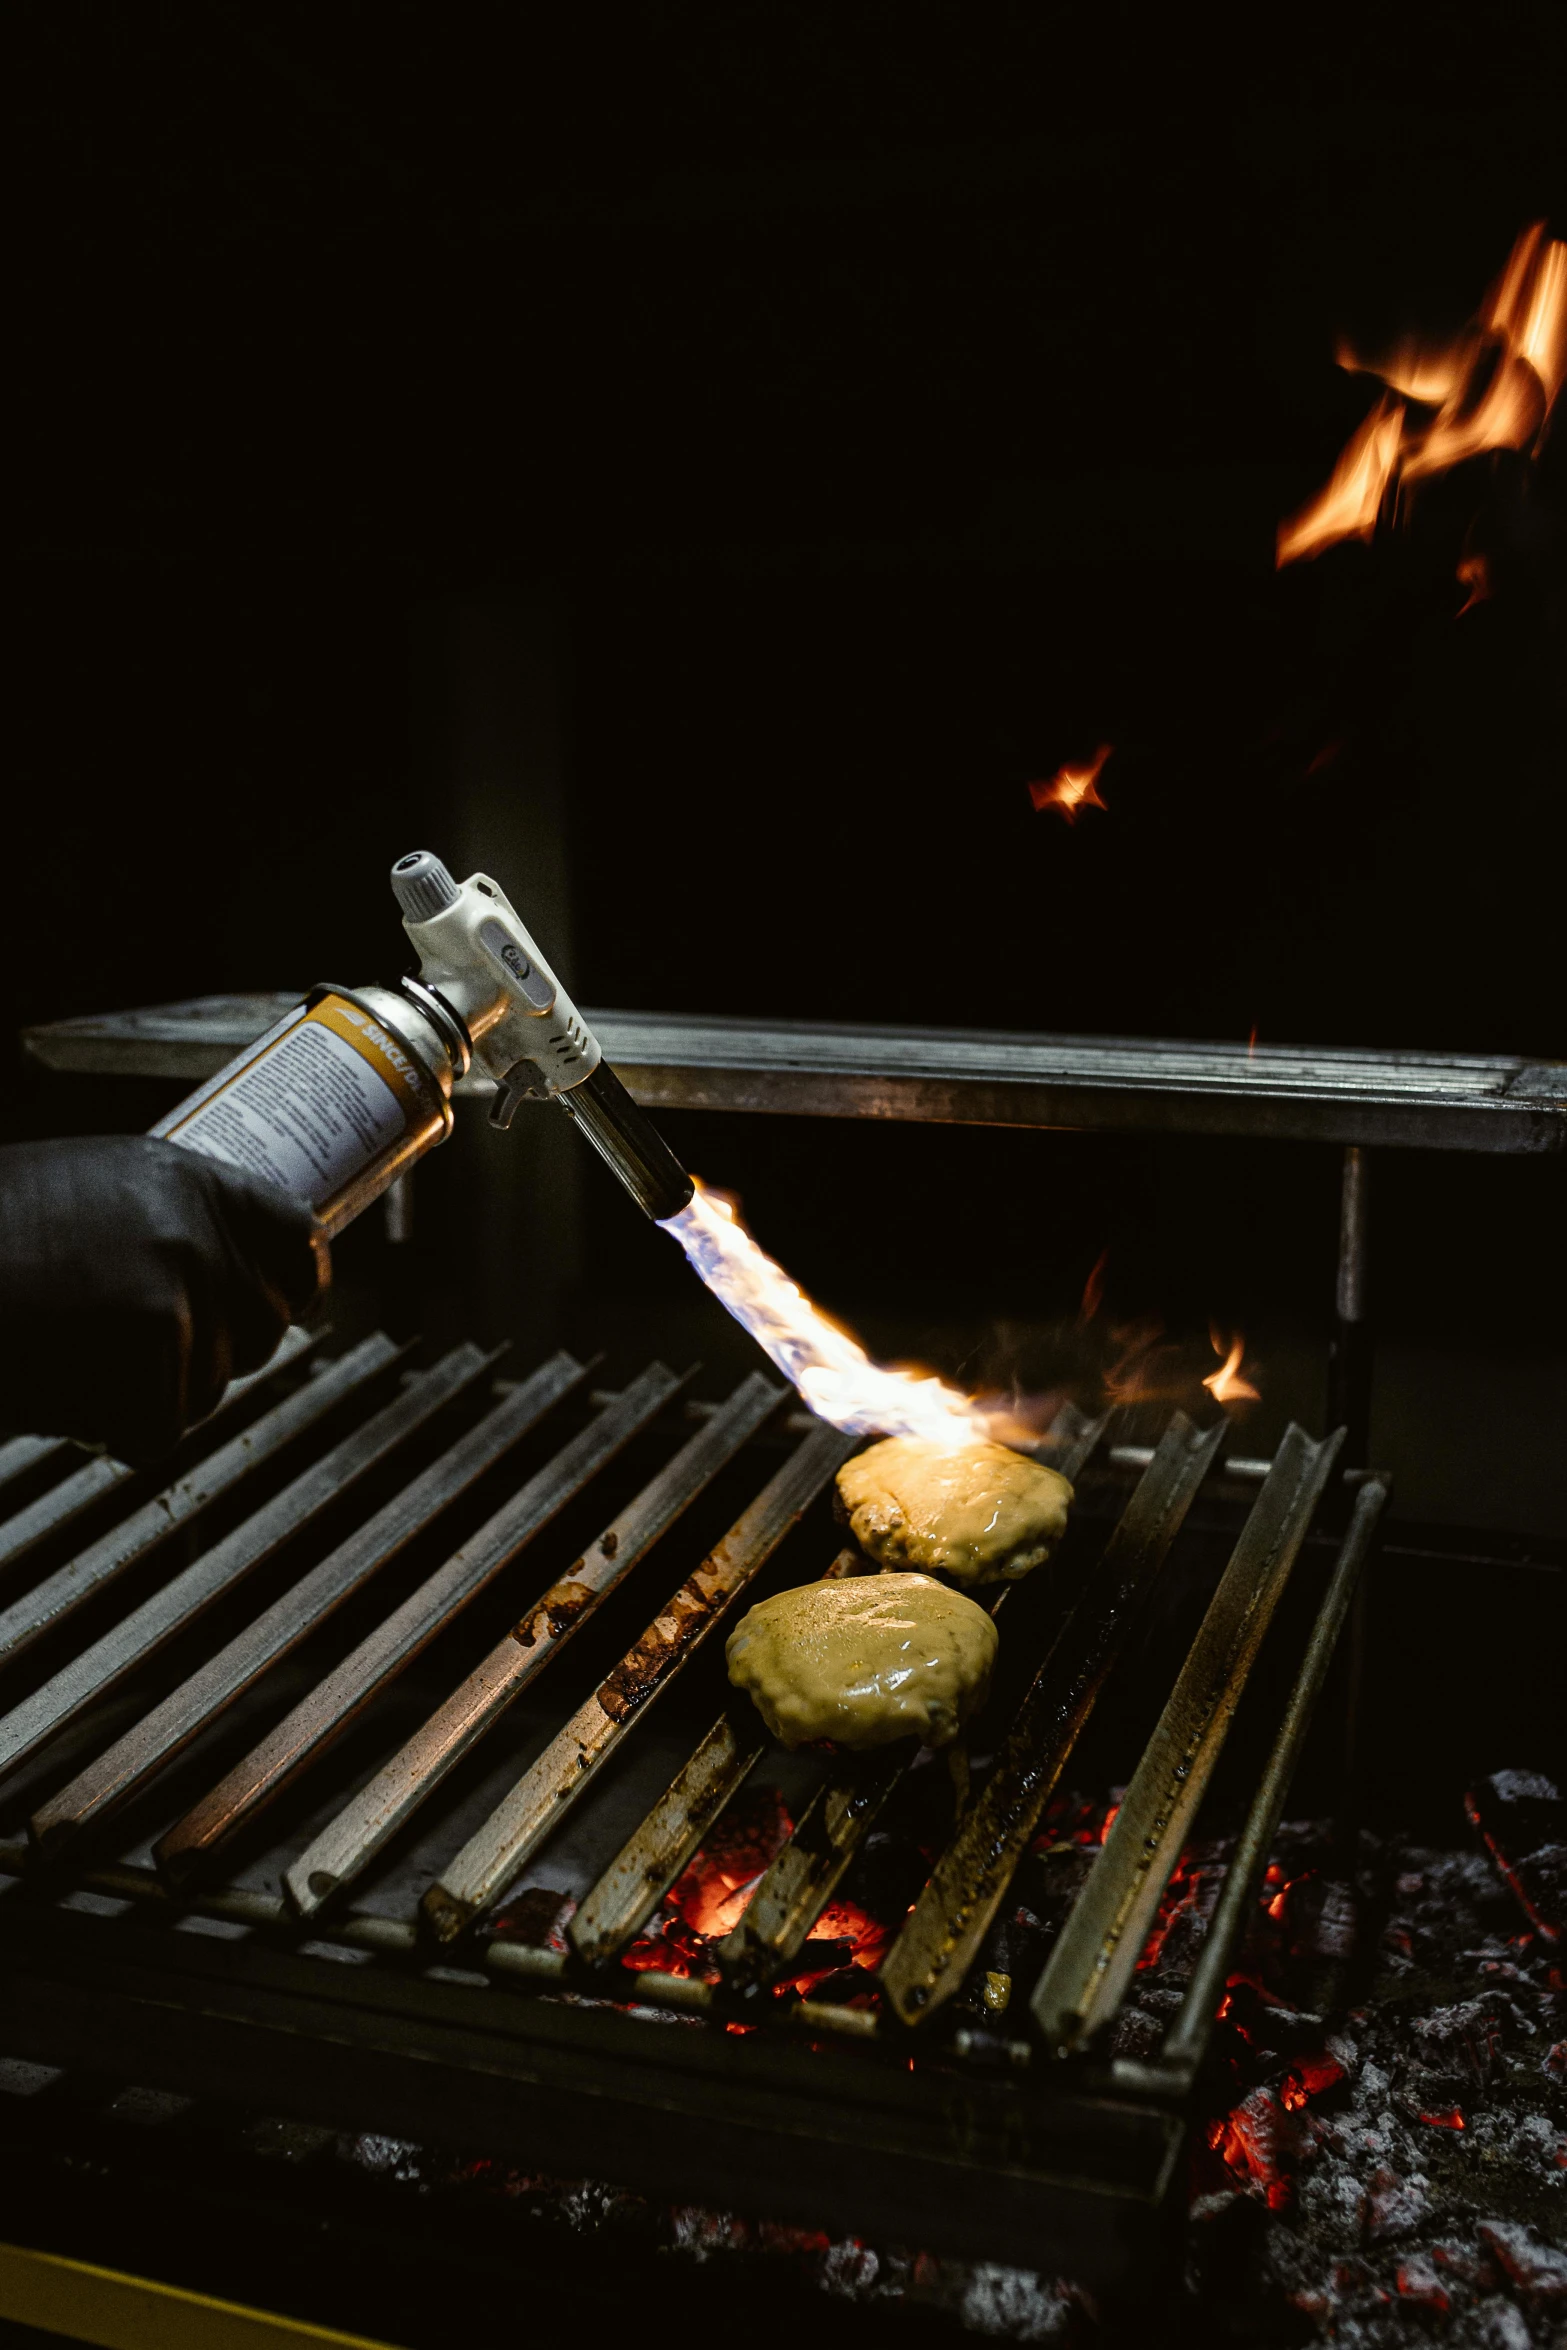 a person is cooking a hamburger on a grill, by Adriaen Hanneman, unsplash, auto-destructive art, welding torches for arms, with a black background, molecular gastronomy, grilled artichoke